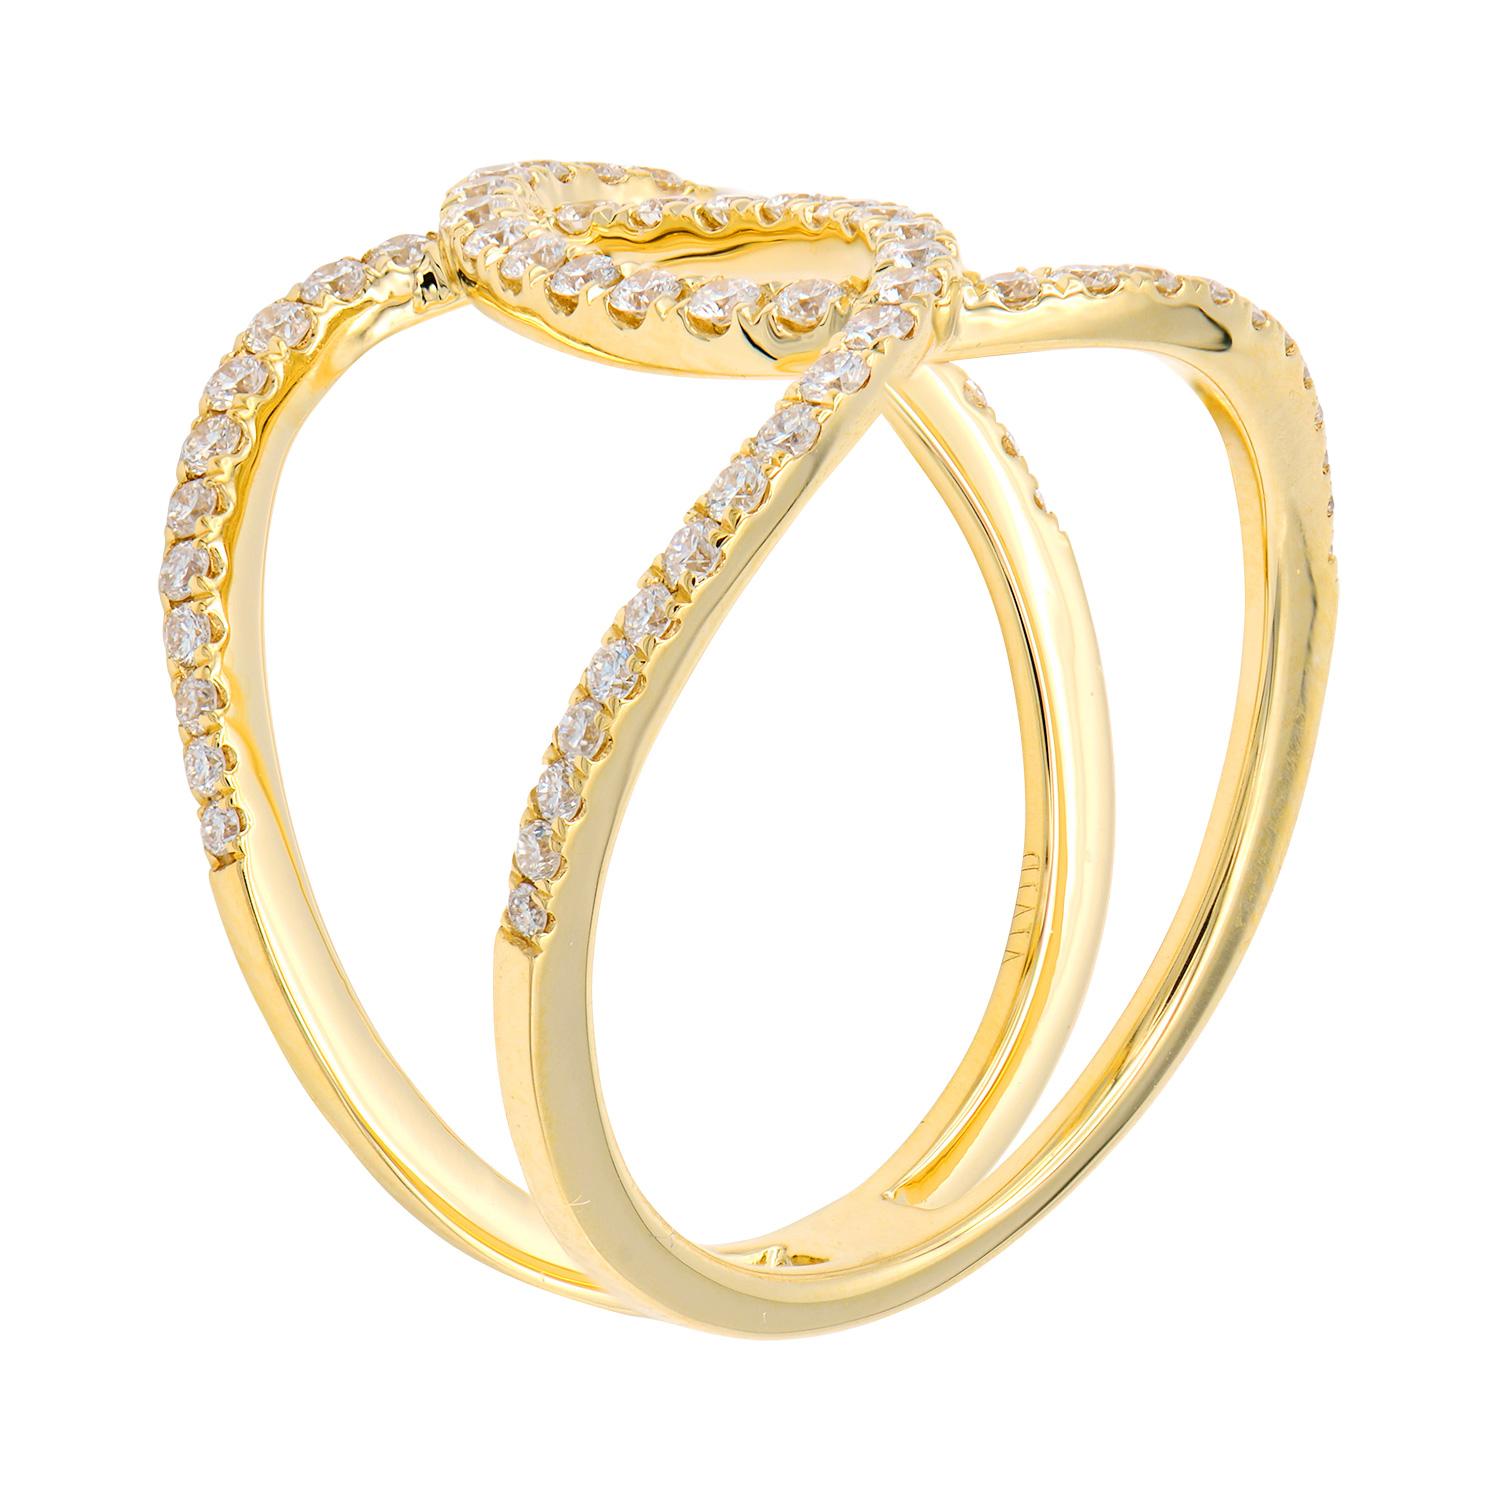 This beautiful fashionable ring appears as if two loops are overlapping each other to make a stunning design. This ring is size 6.5 and has 62 round VS2, G color diamonds totaling 0.47 carats which are set in 3.4 grams of 18 karat yellow gold. 